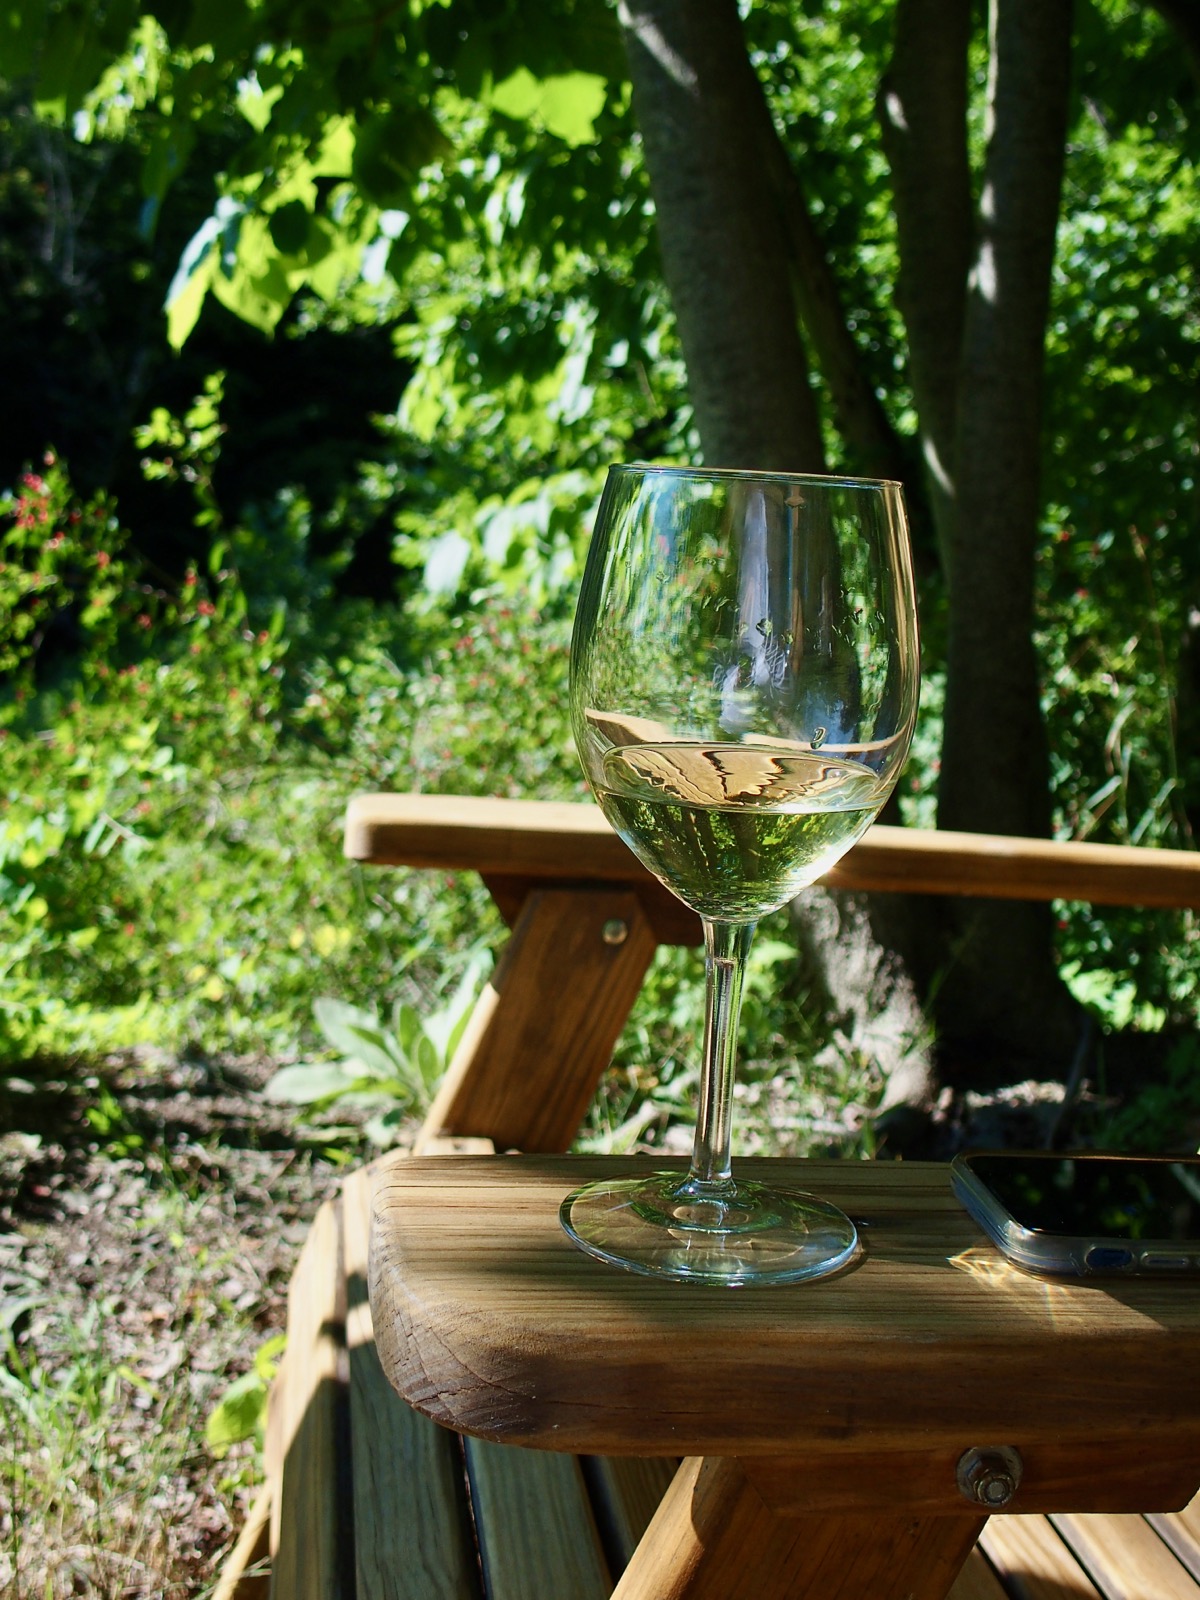 Photo of a glass of white wine on the arm of an adirondack chair in the late afternoon